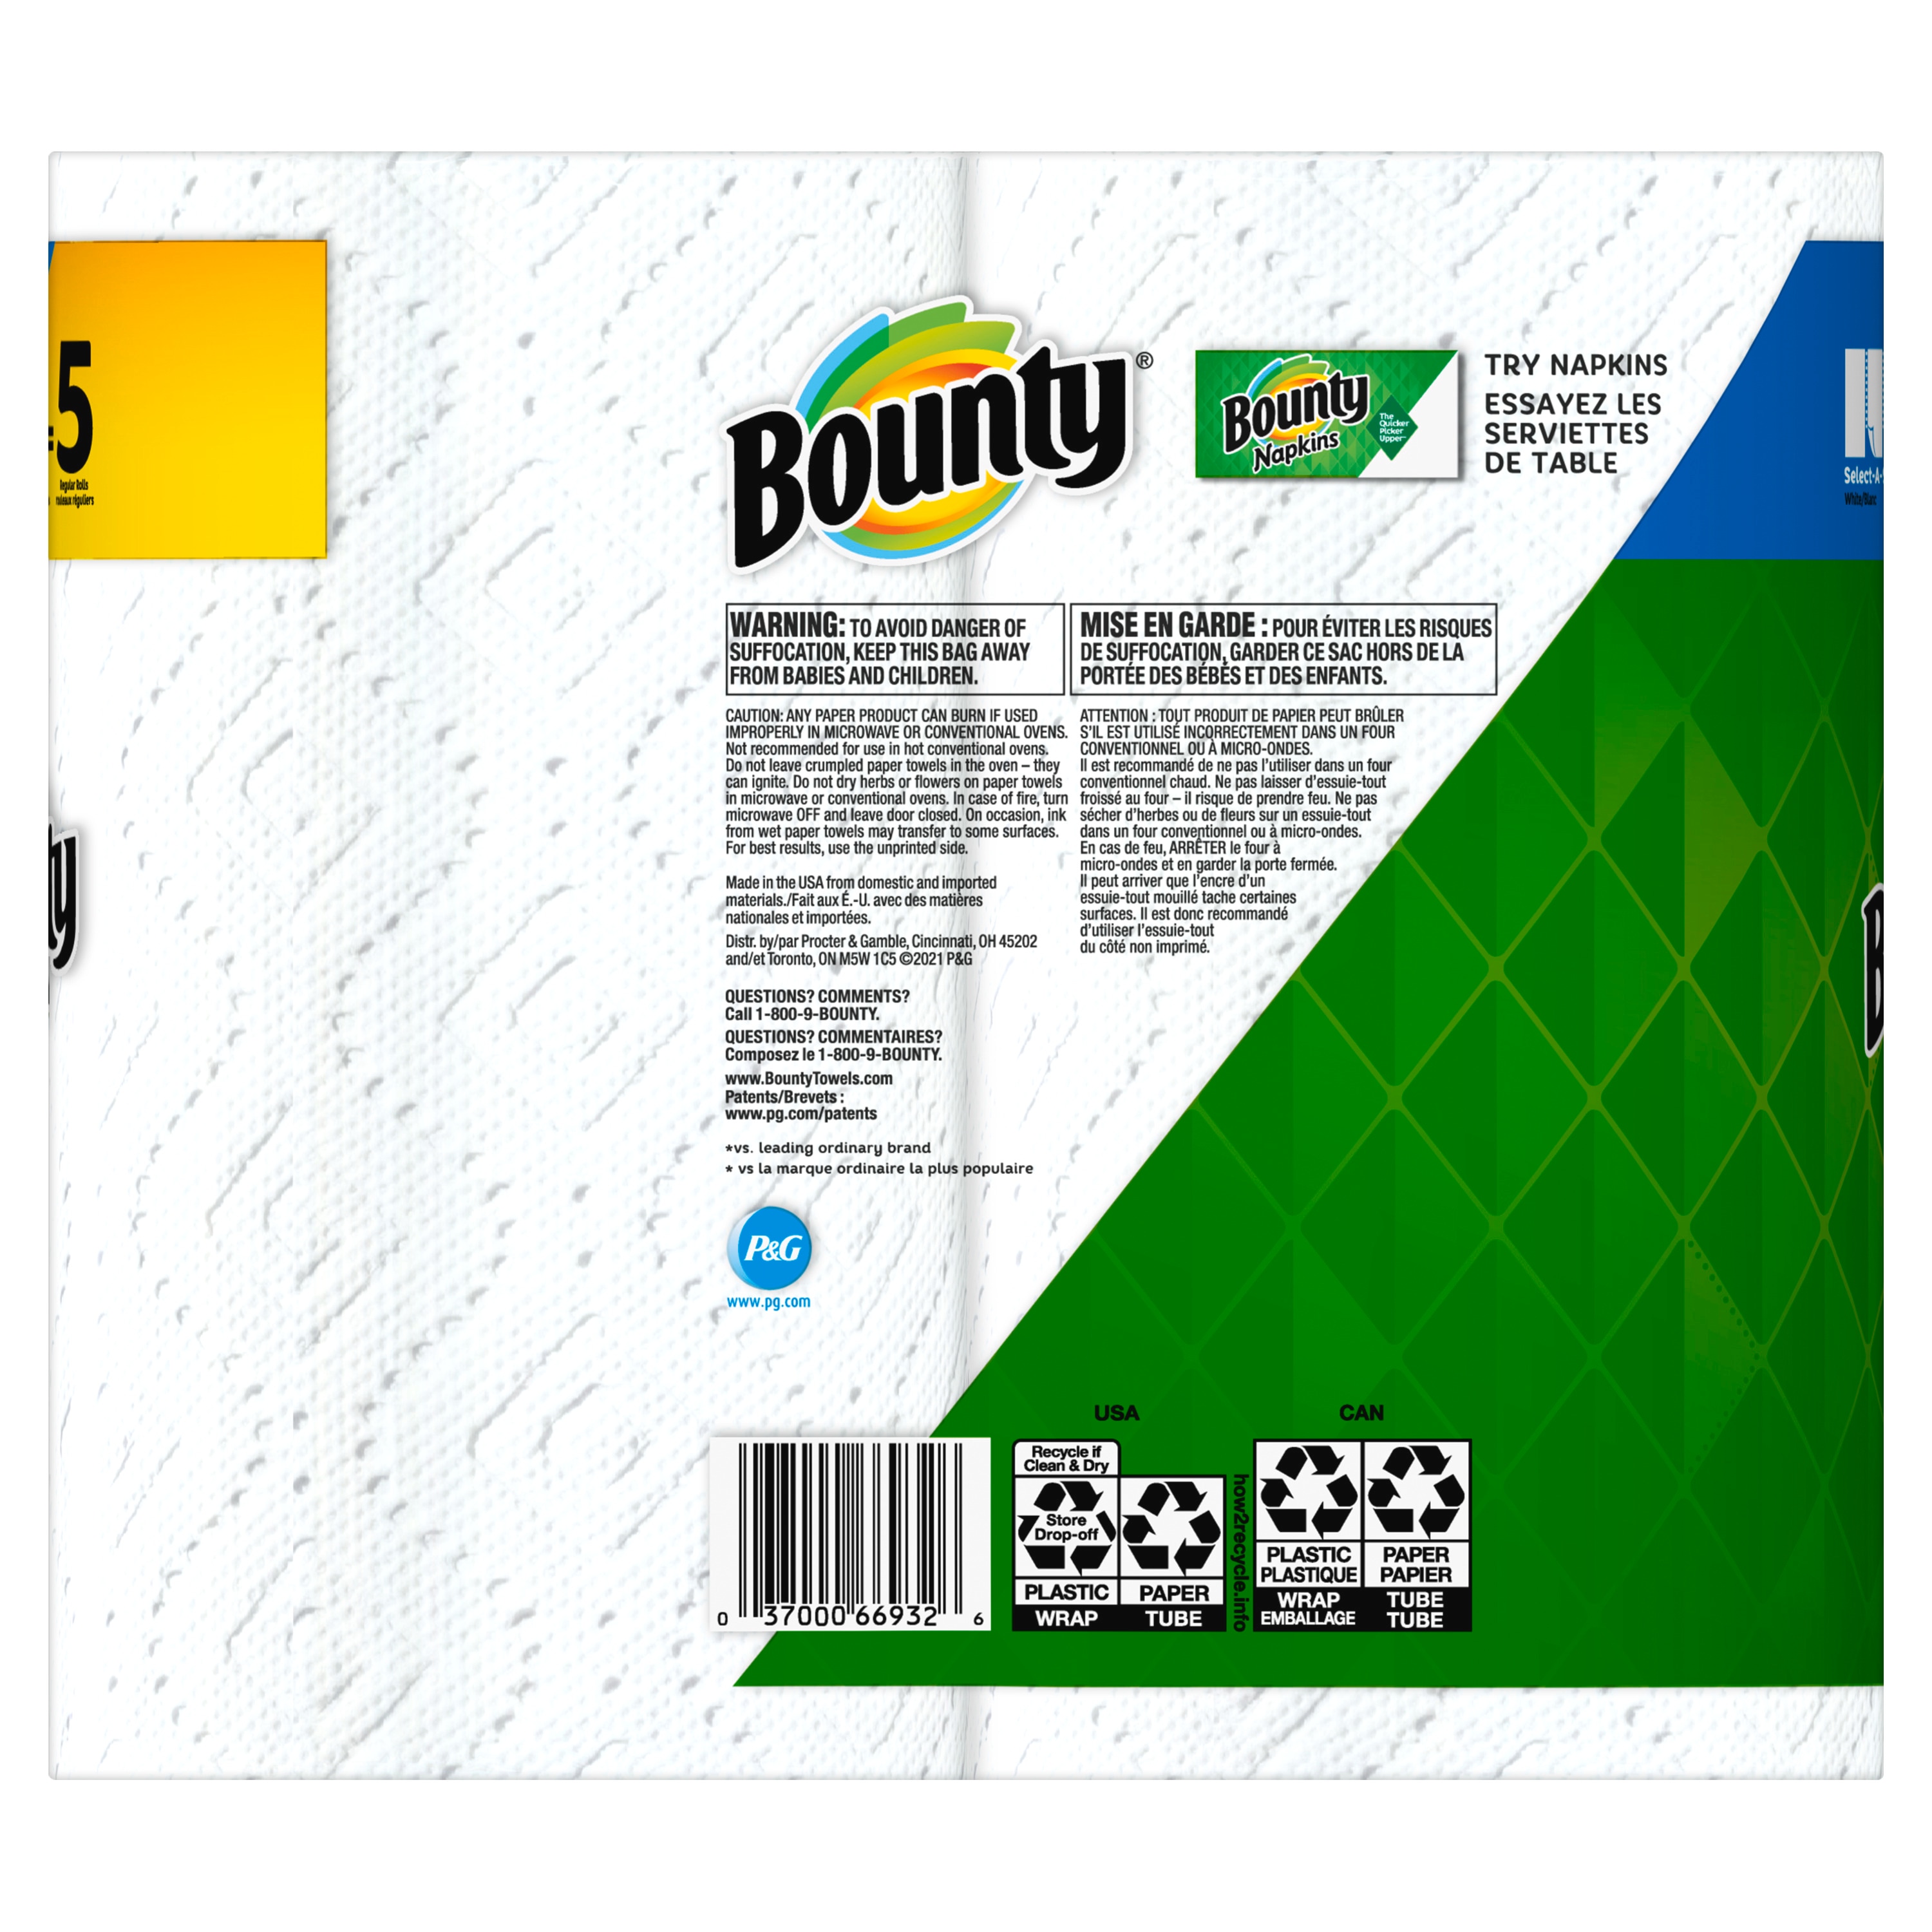 Bounty Select-a-Size Double Plus-Roll 2-Count Paper Towels in the